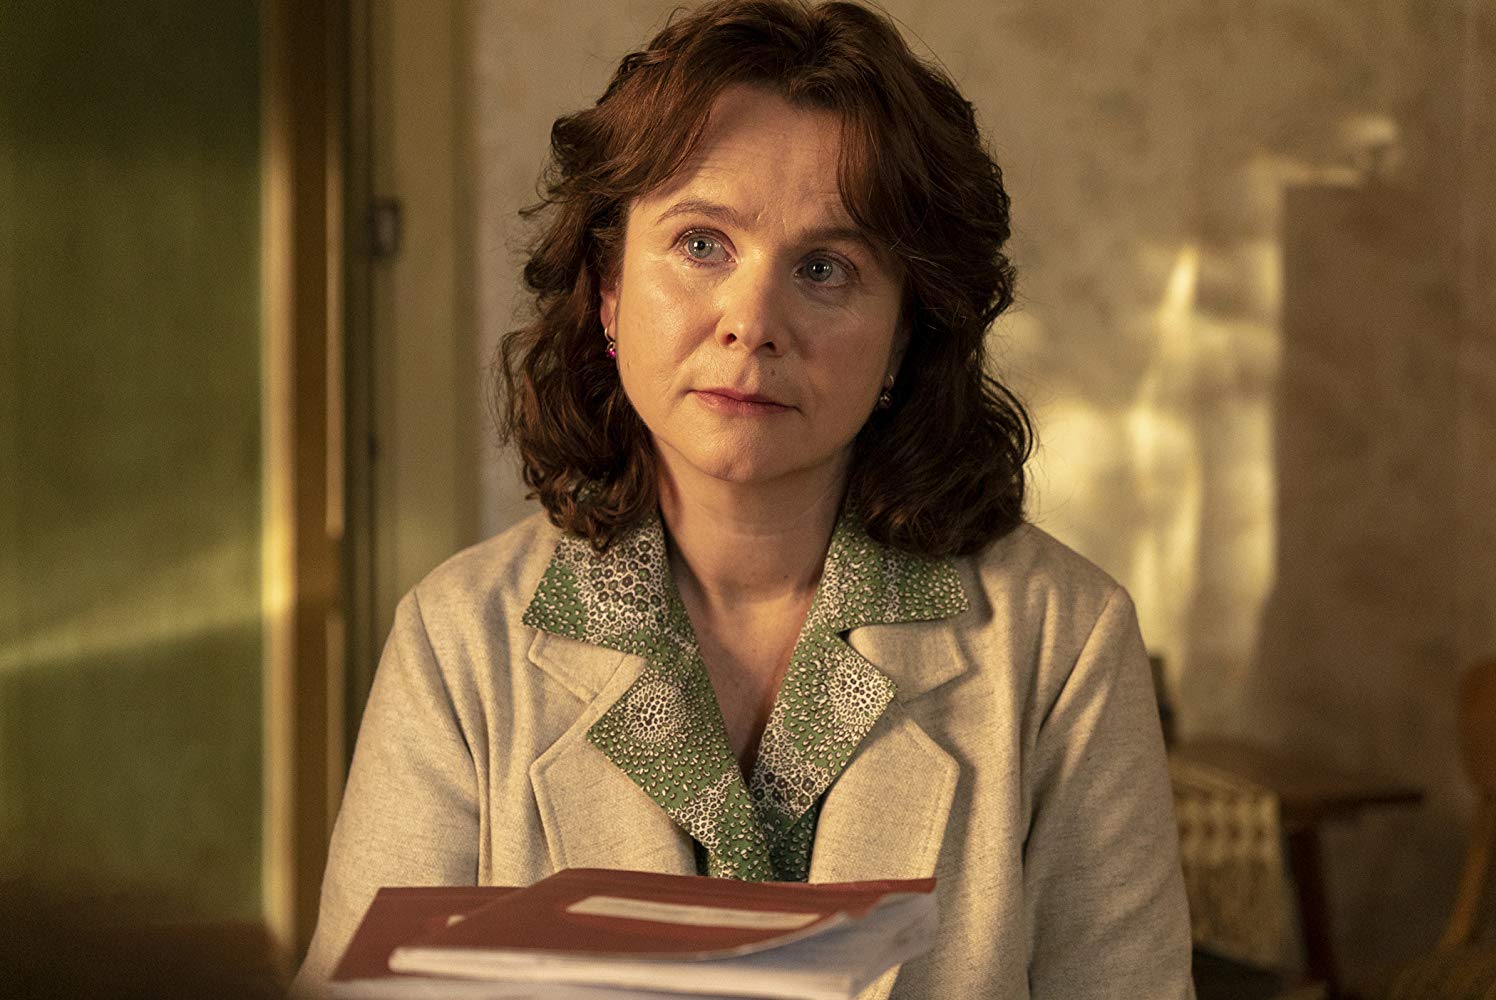 Emily watson pictures